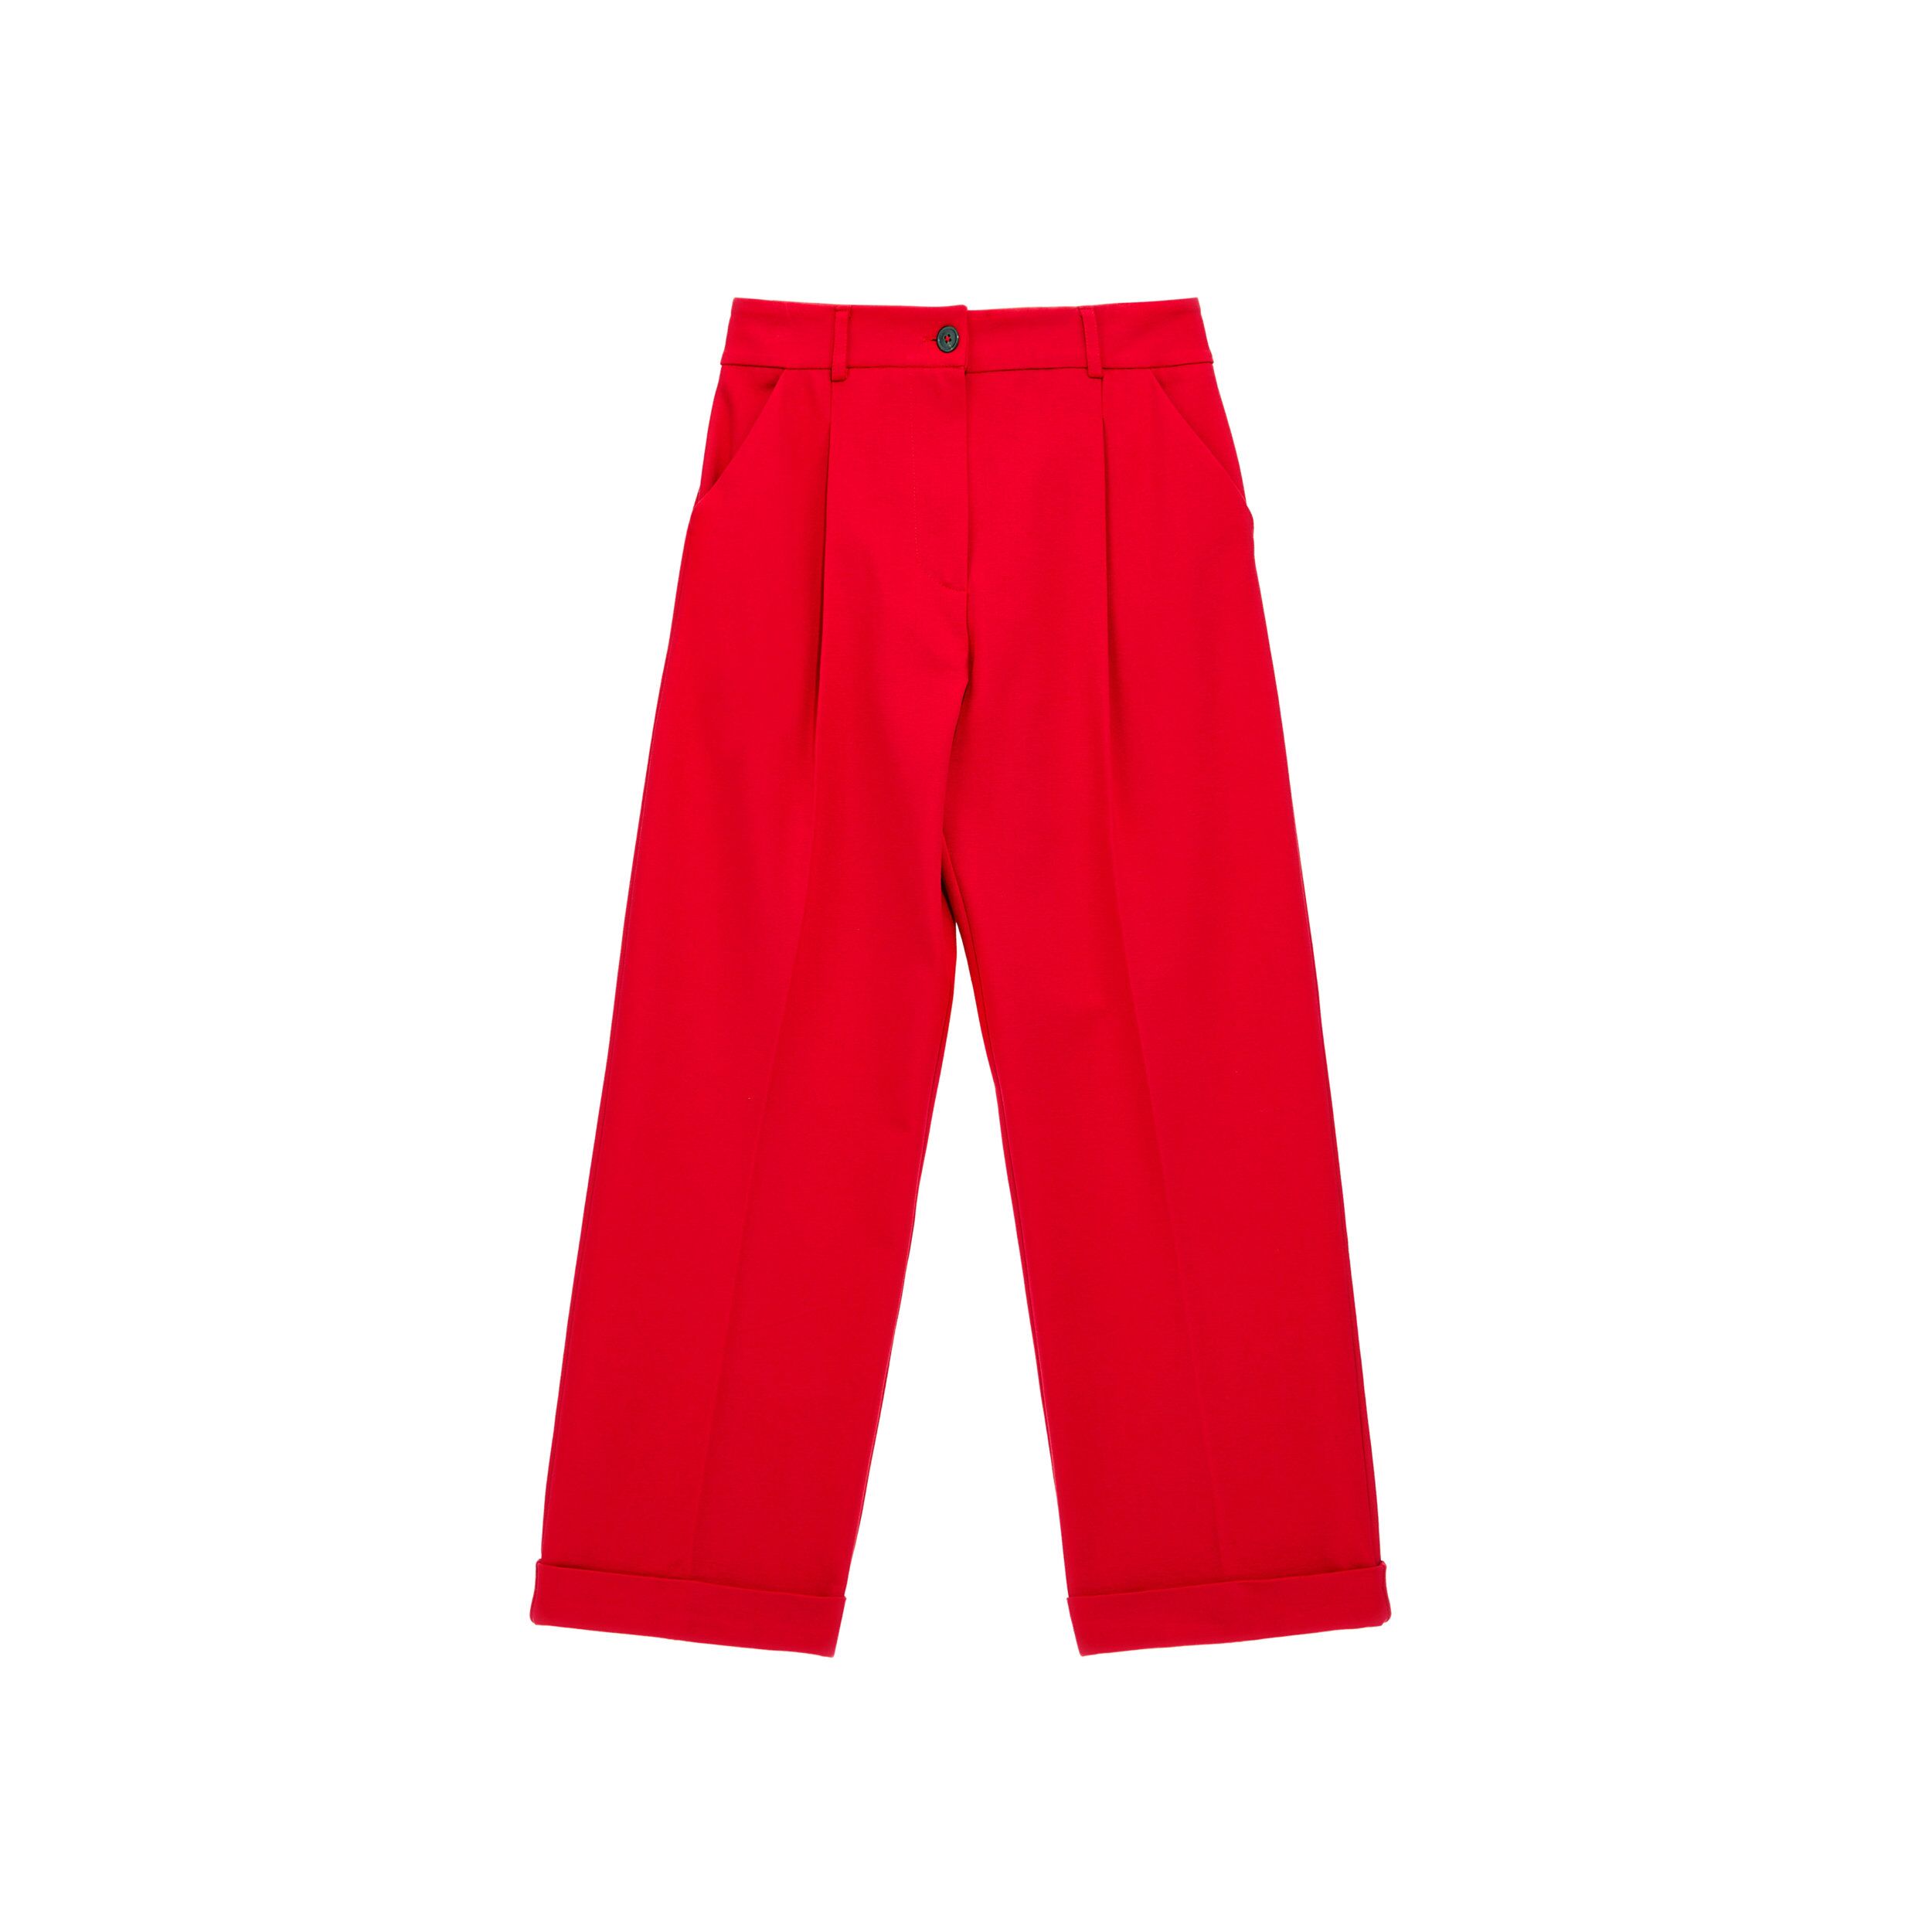 Tr3148 Shirtaporter Rot Red Pants Hose Trousers (2)